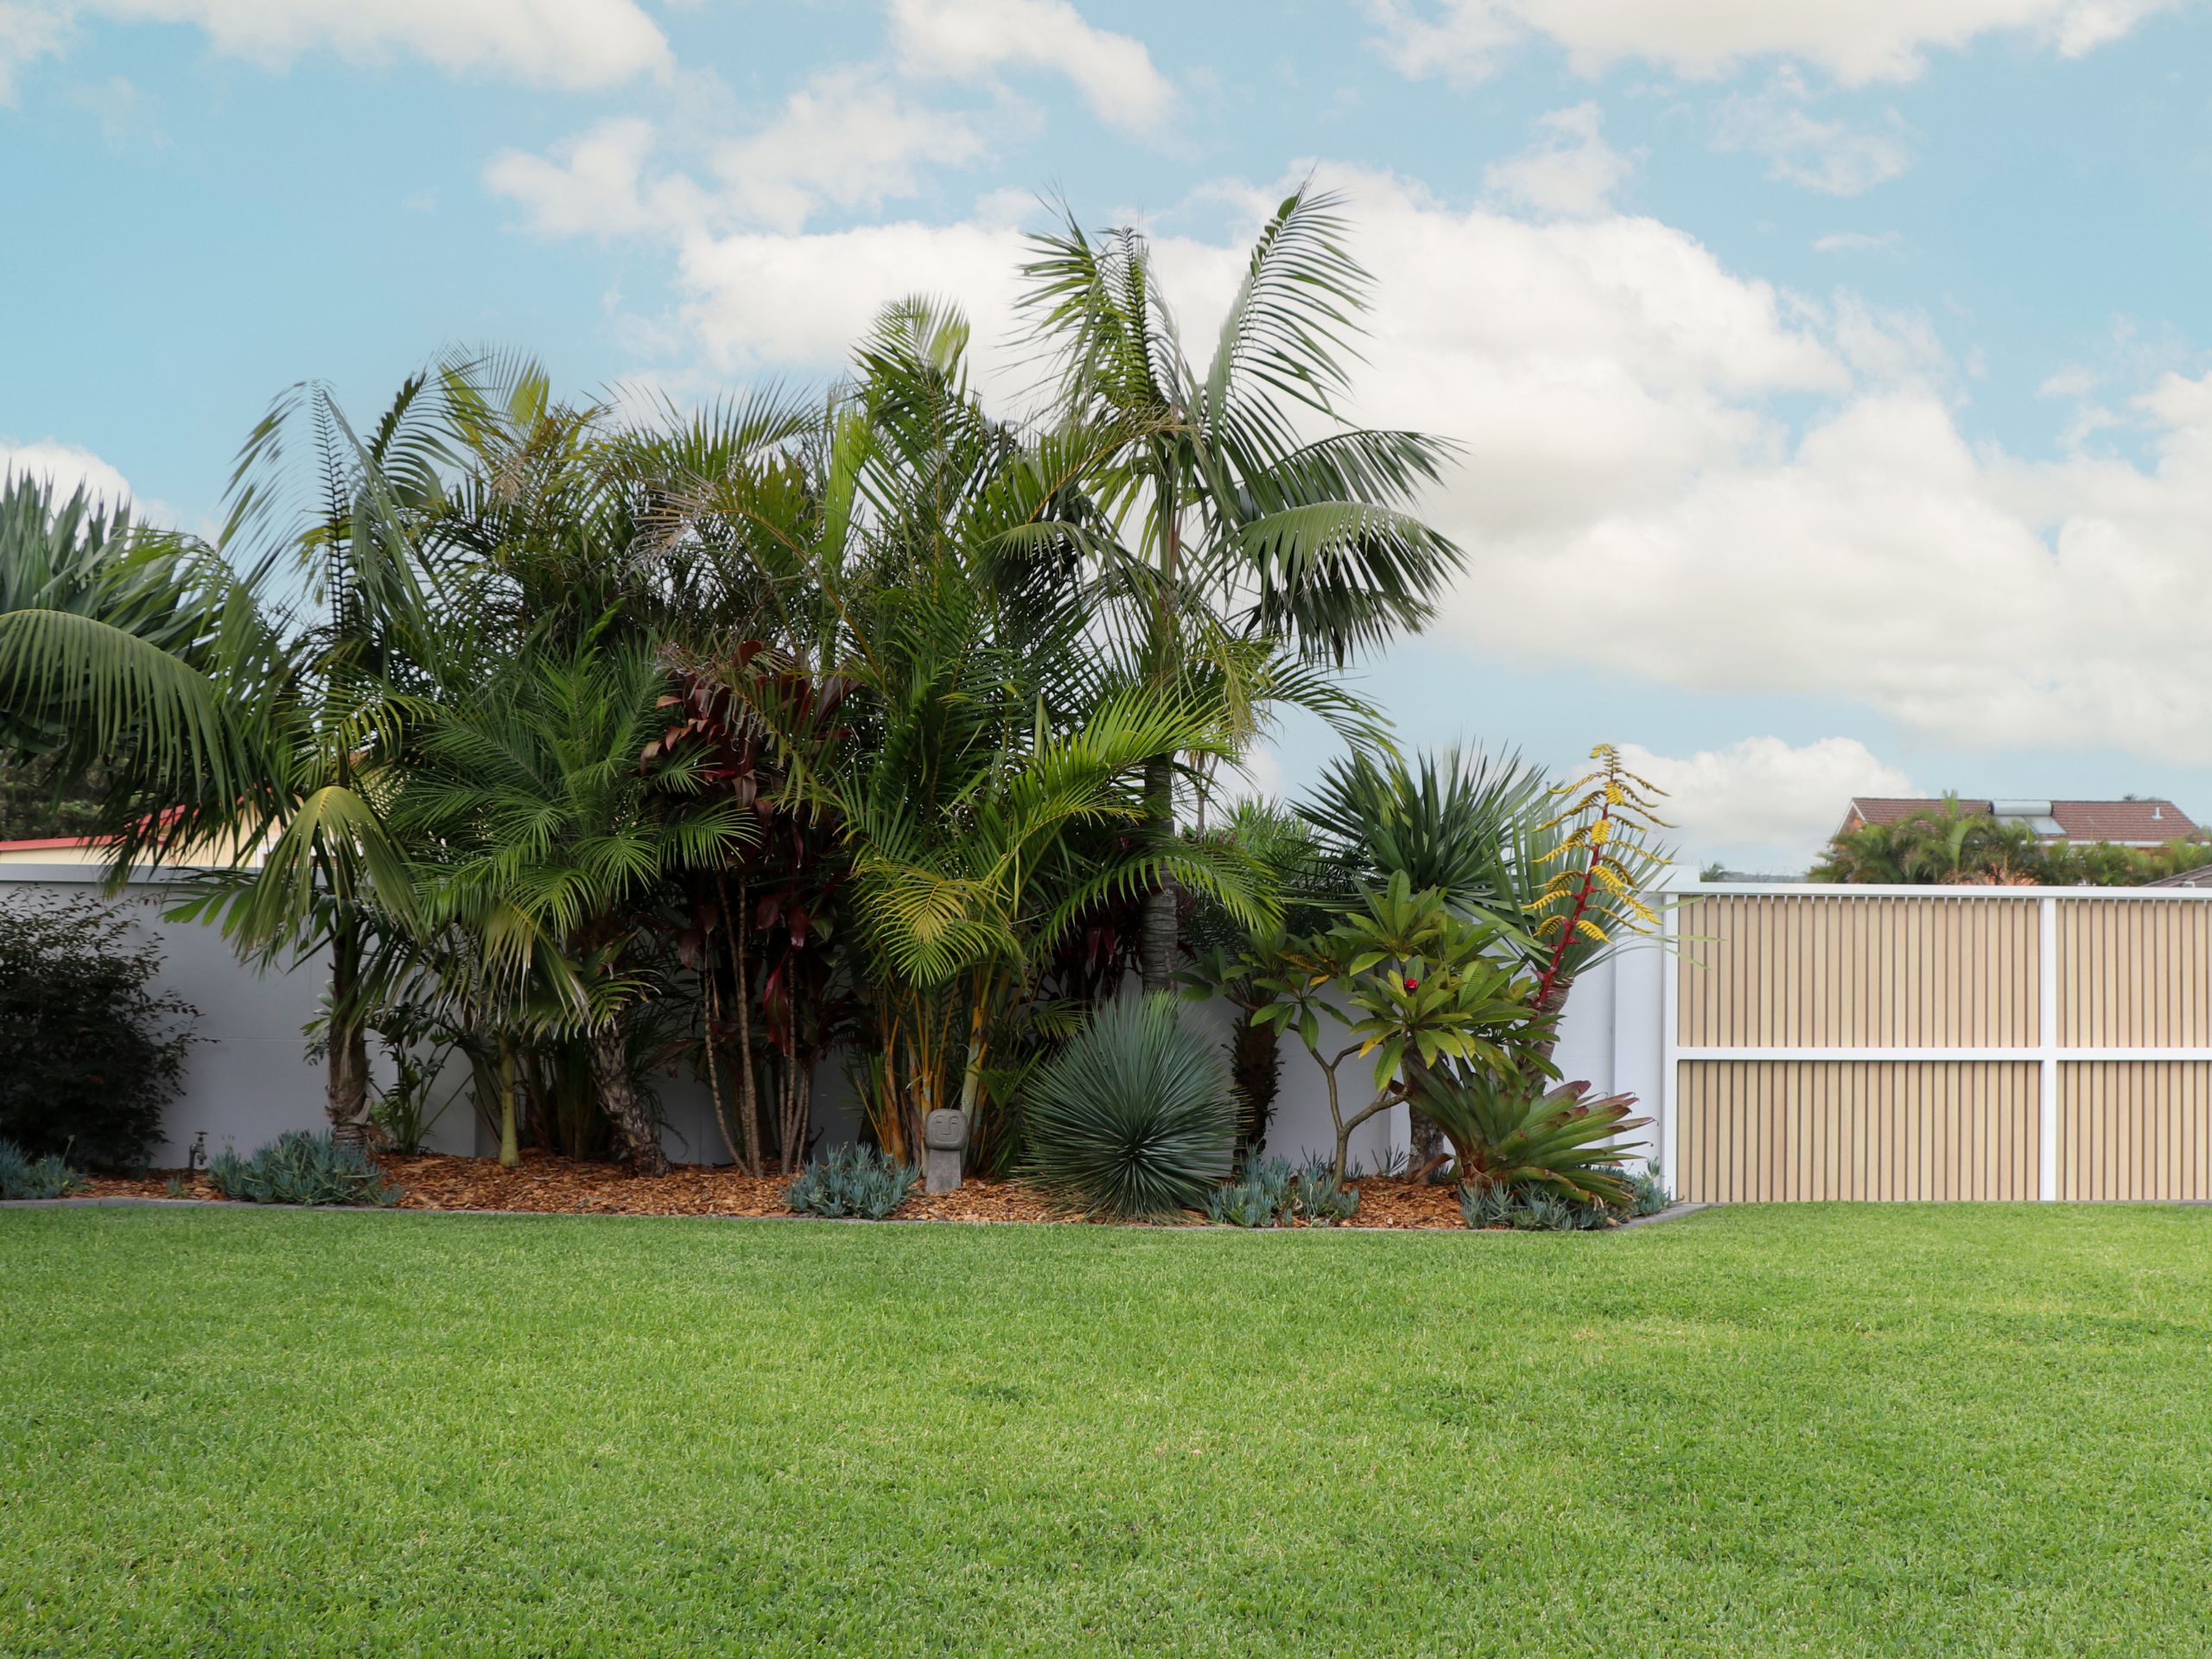 EstateWall creates a private front yard